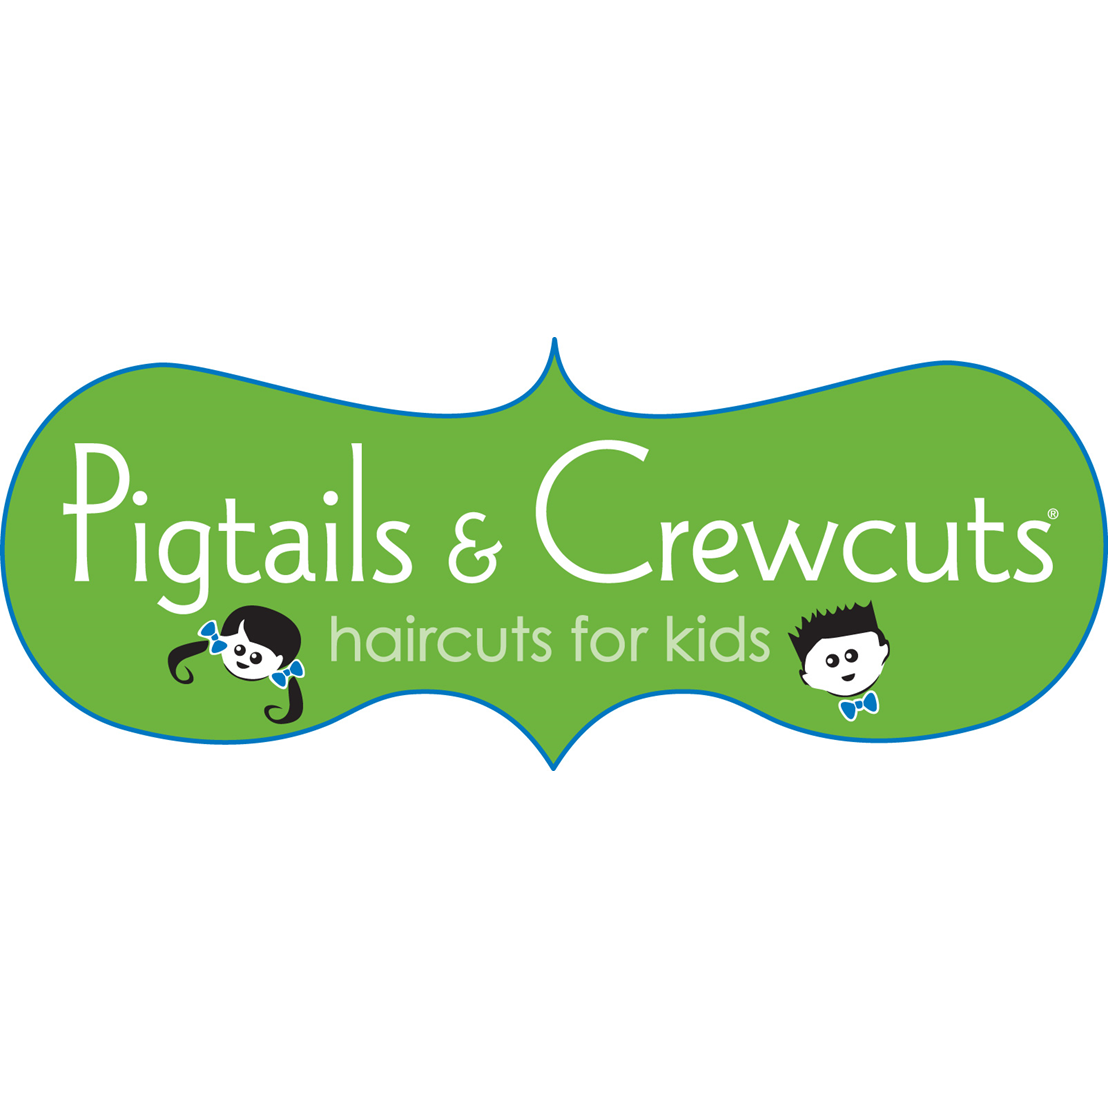 Pigtails & Crewcuts: Haircuts for Kids - Buckhead Photo